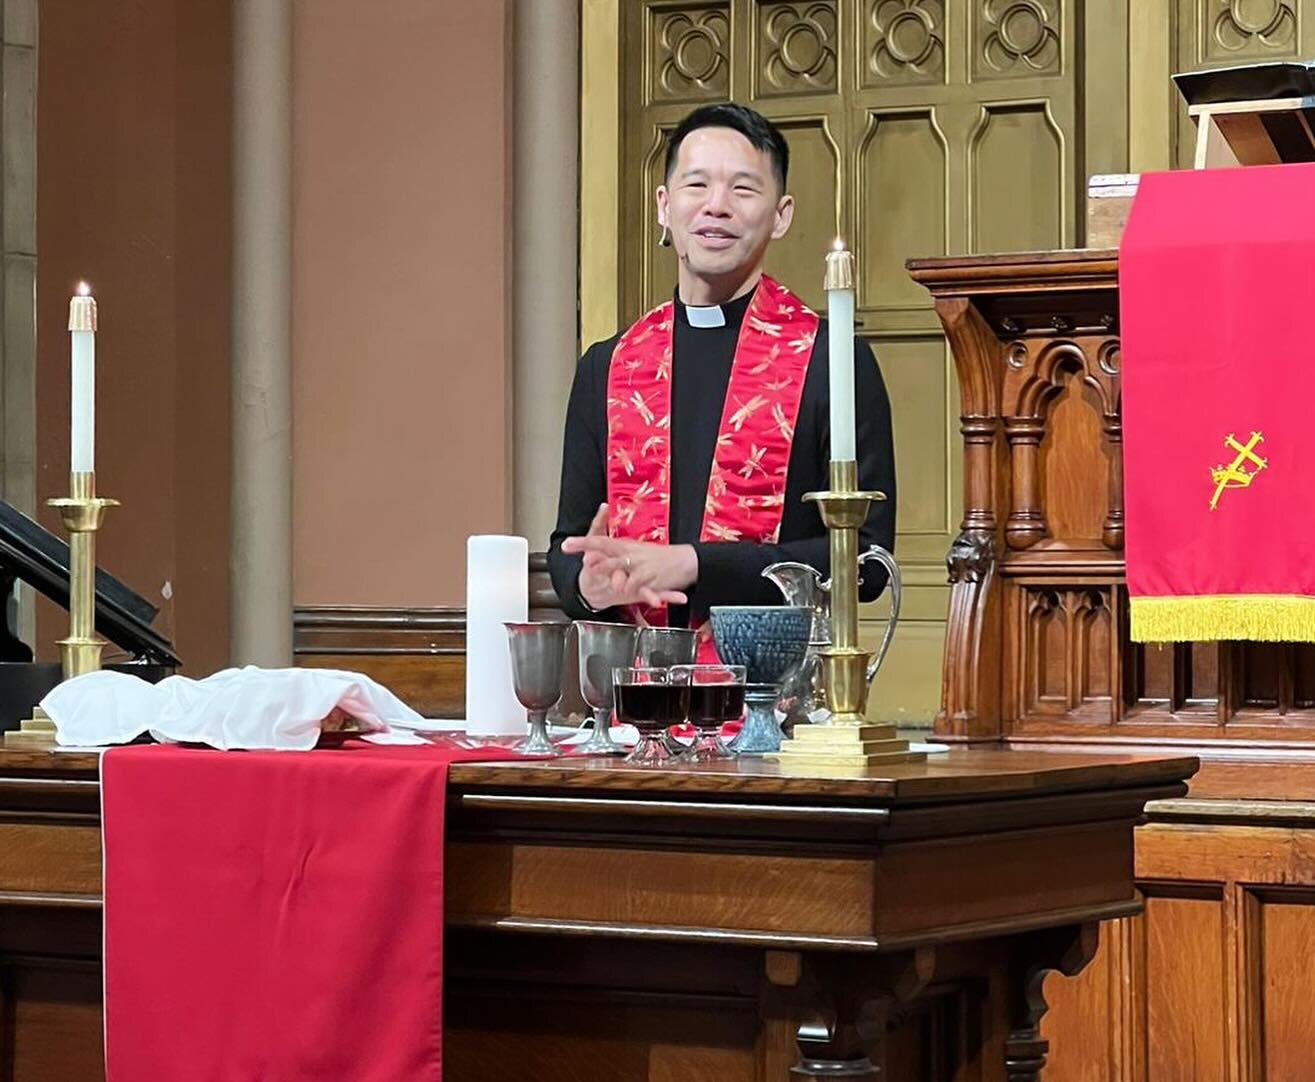 Hopping back on the gram for a second to add this day of celebration to the grid: the REV. Jeff Freaking Chu. What an absolute joy to be a part of and witness this wonderful day.